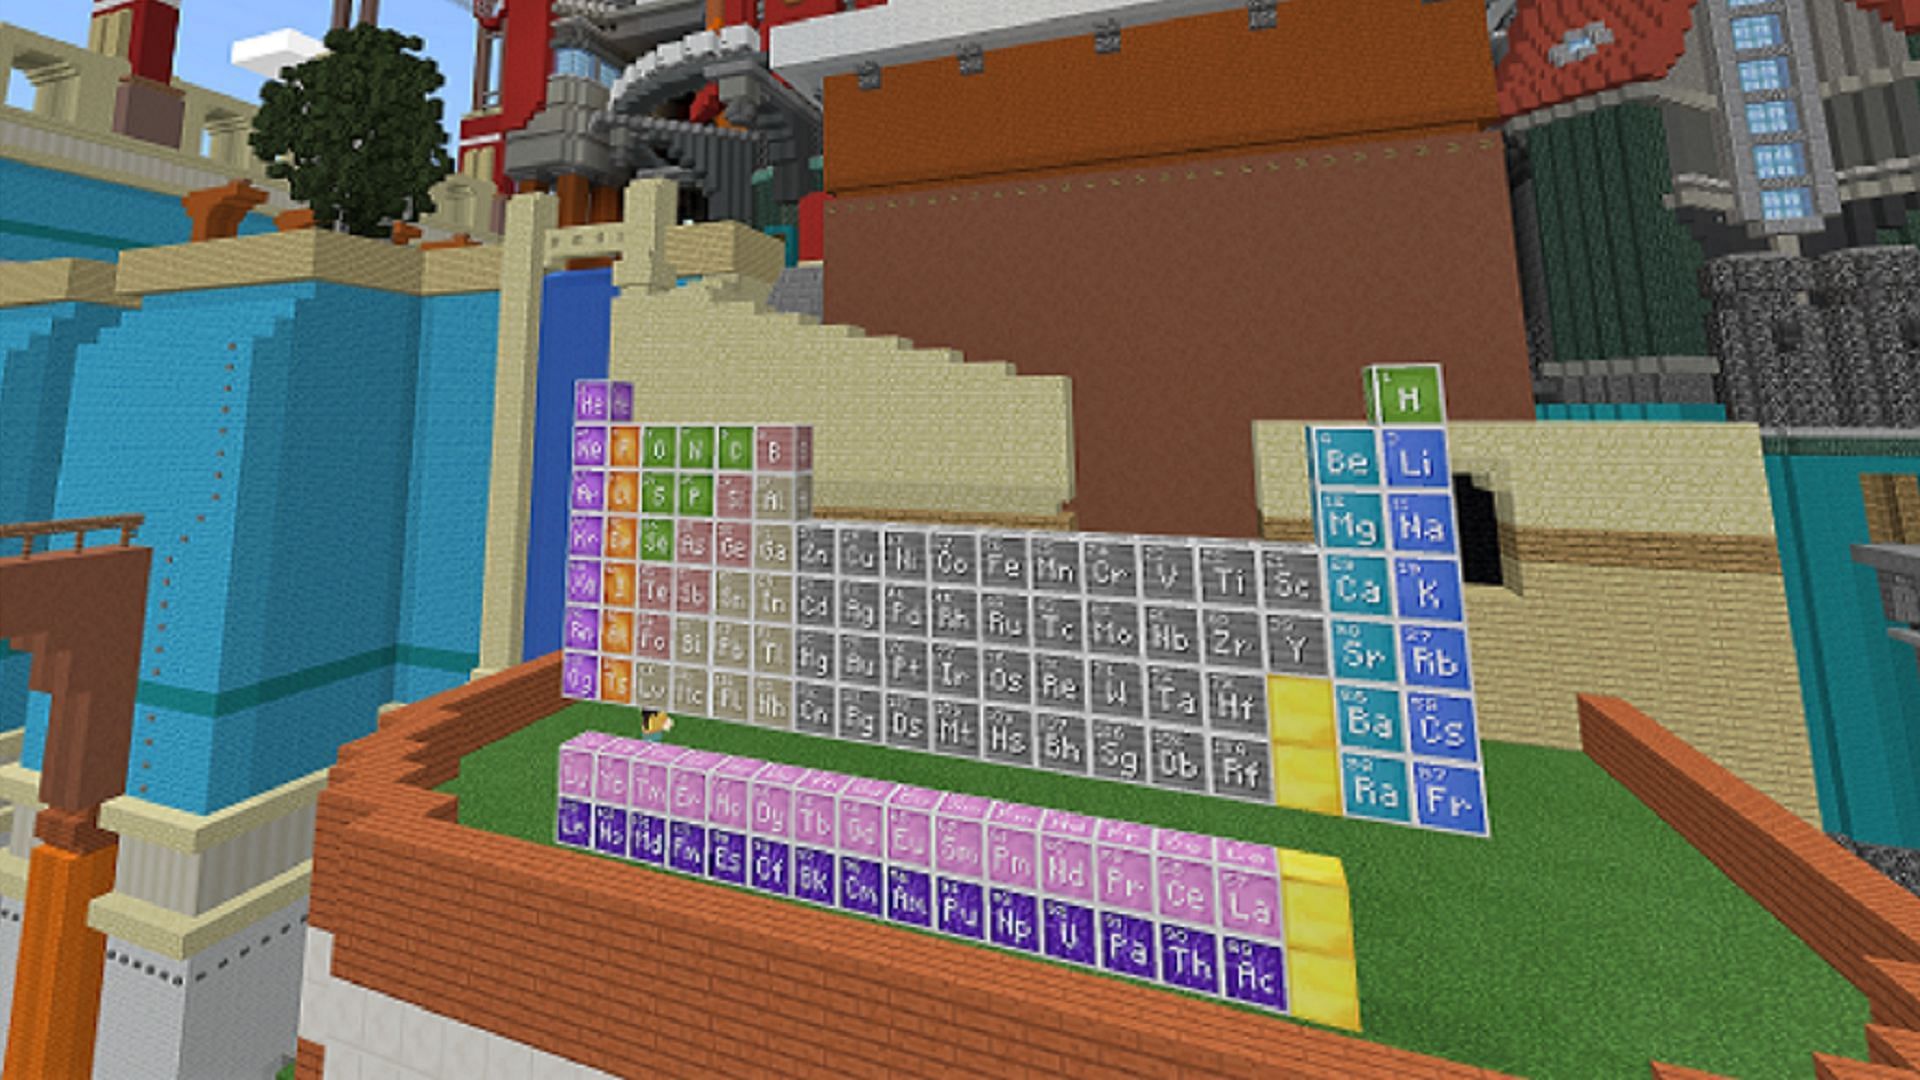 The World of Chemistry highlights one of the major aspects of Education Edition&#039;s gameplay (Image via Mojang)